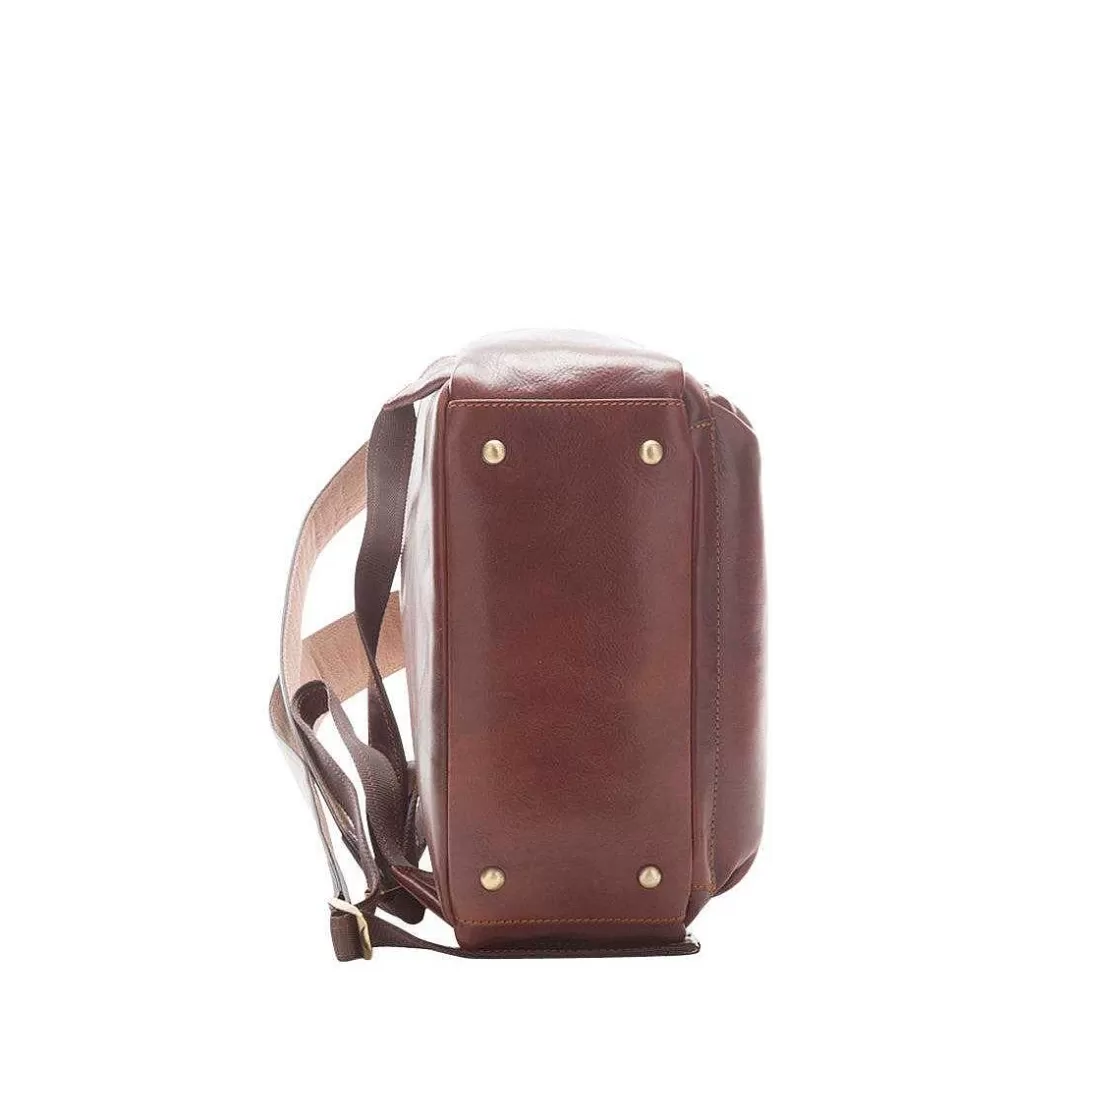 Leonardo Classic Backpack In Full Grain Leather With Zipper Adjustable Straps Front Pocket Available In Various Colors Online